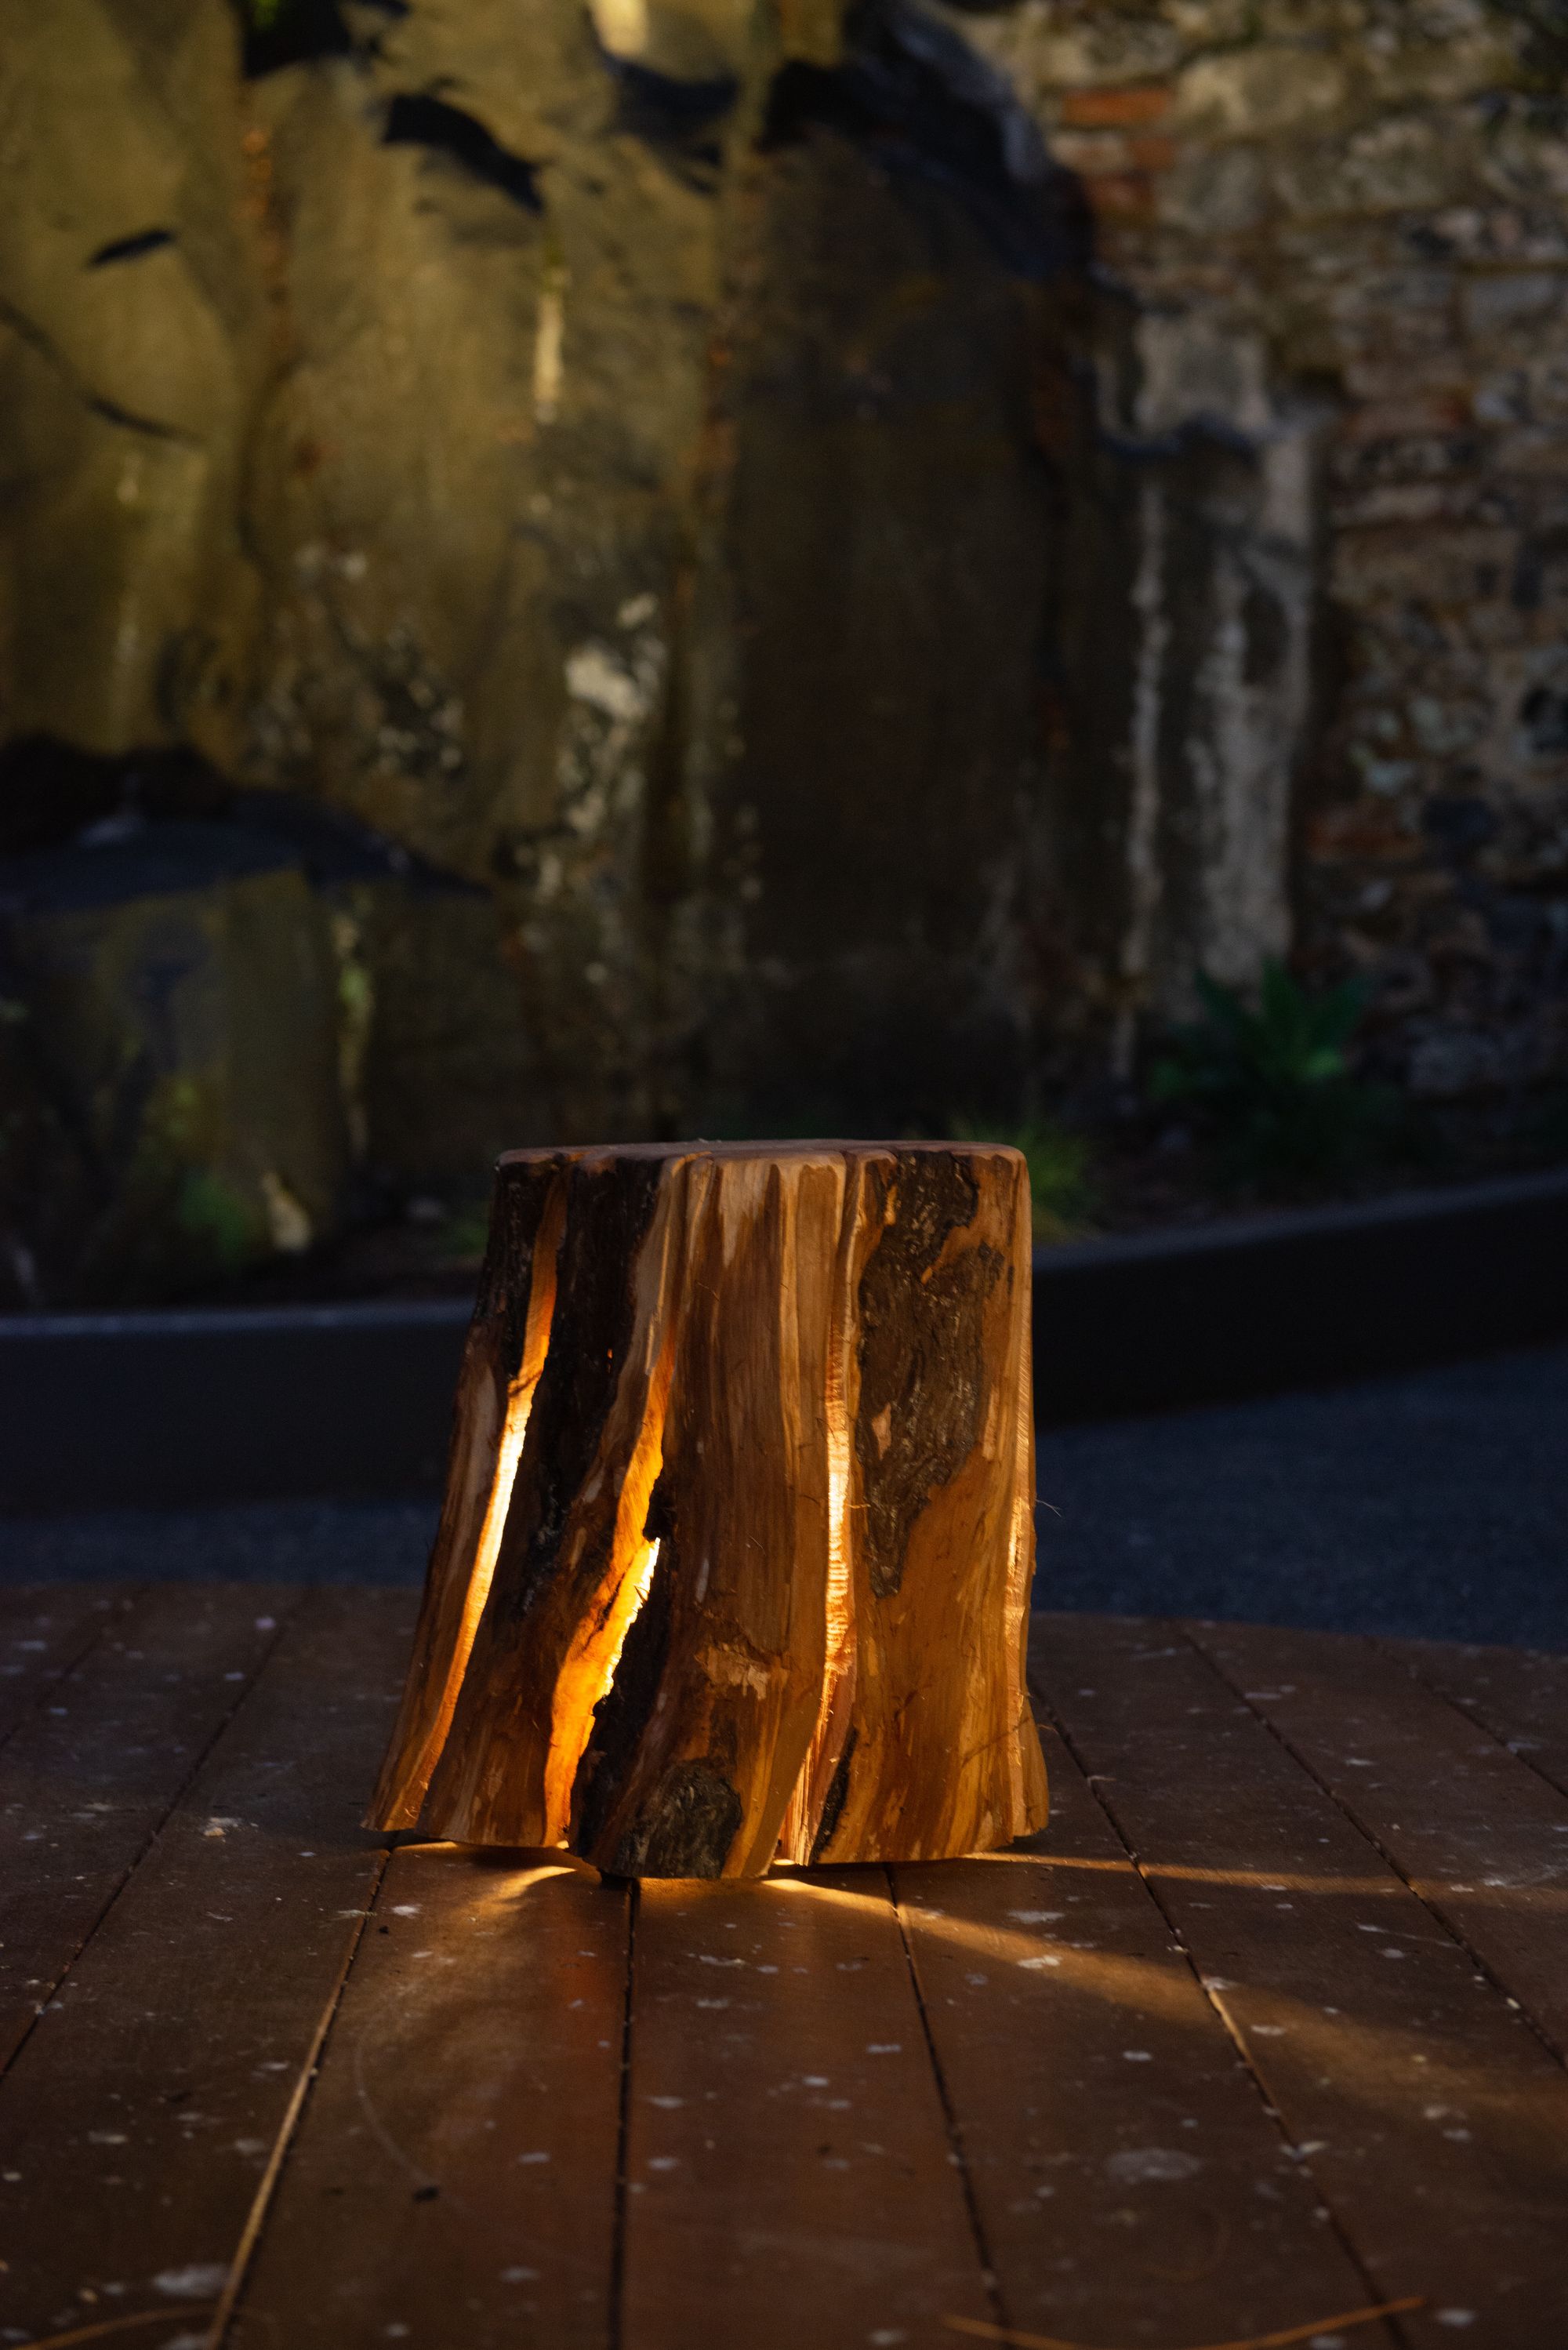 Duncan Meerding's Stump Light showing a moody shot with light coming through the cracks in the log